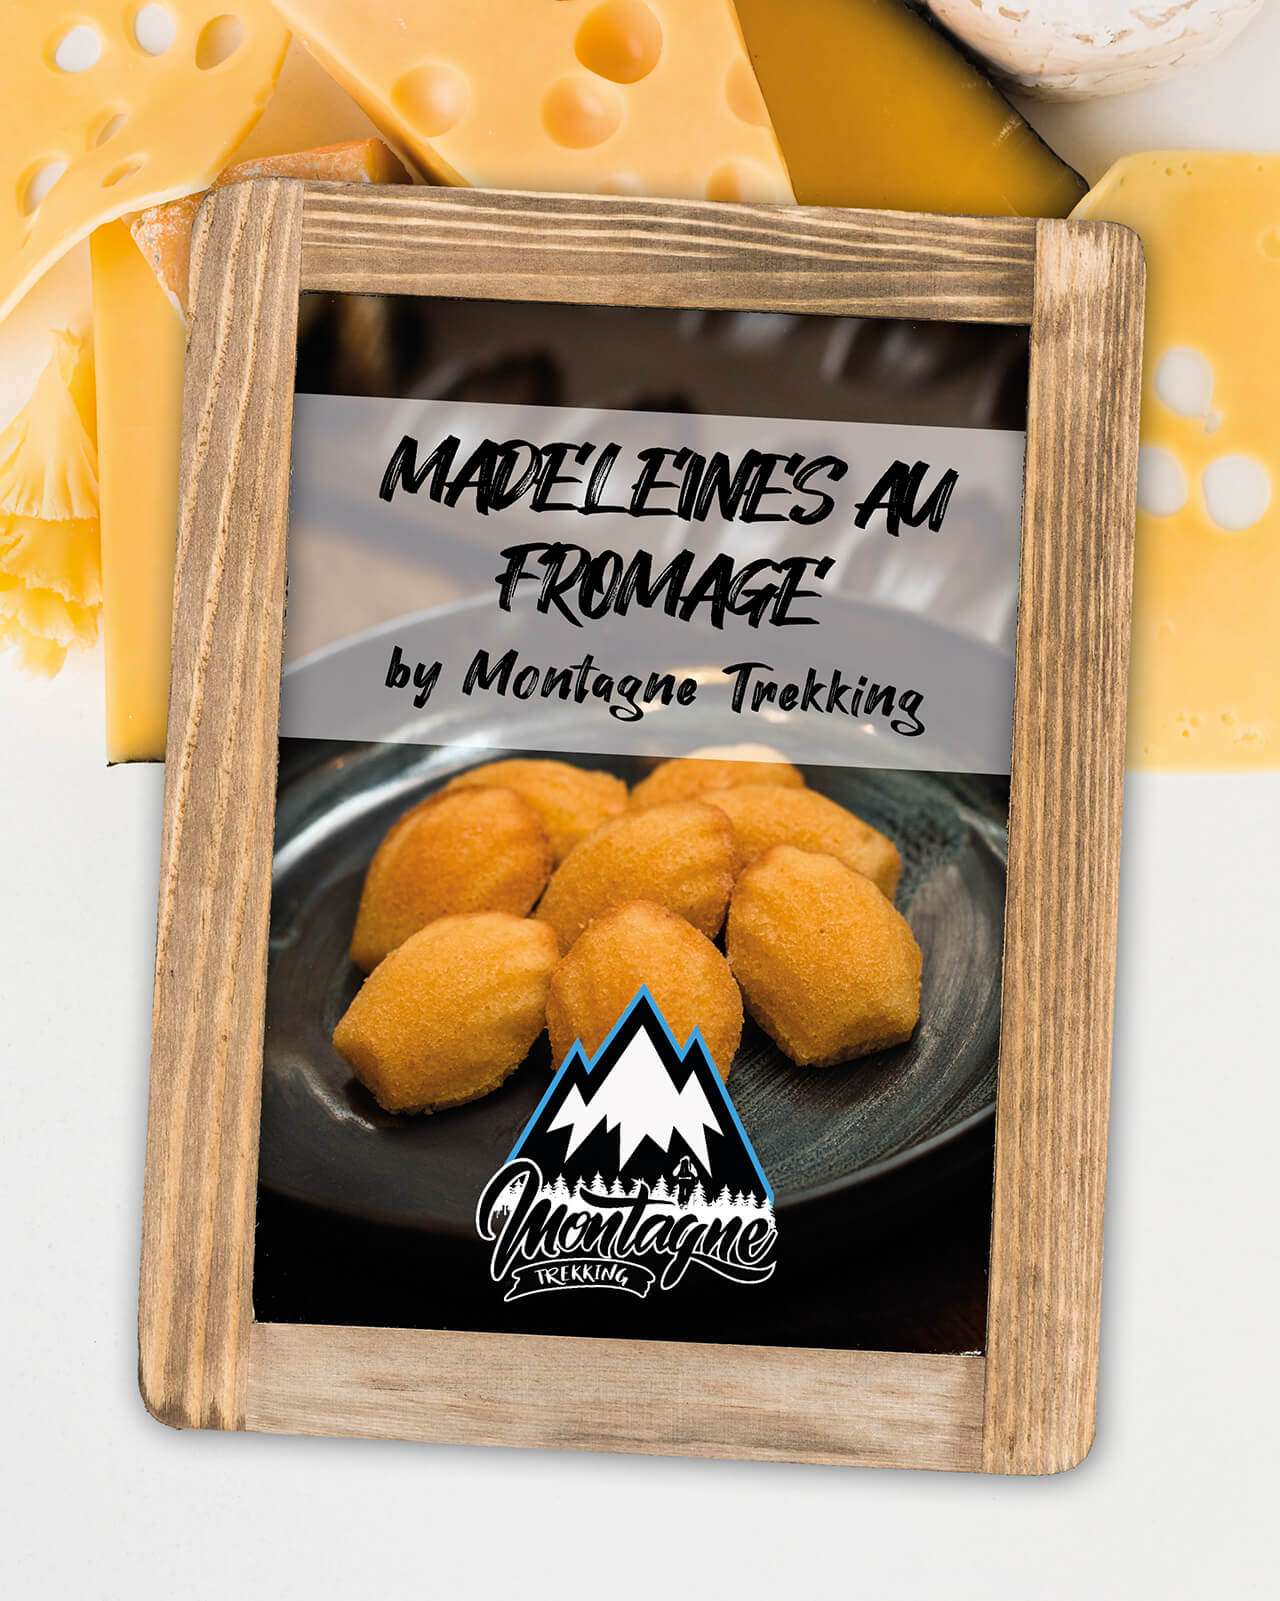 Recette Madeleines au fromage